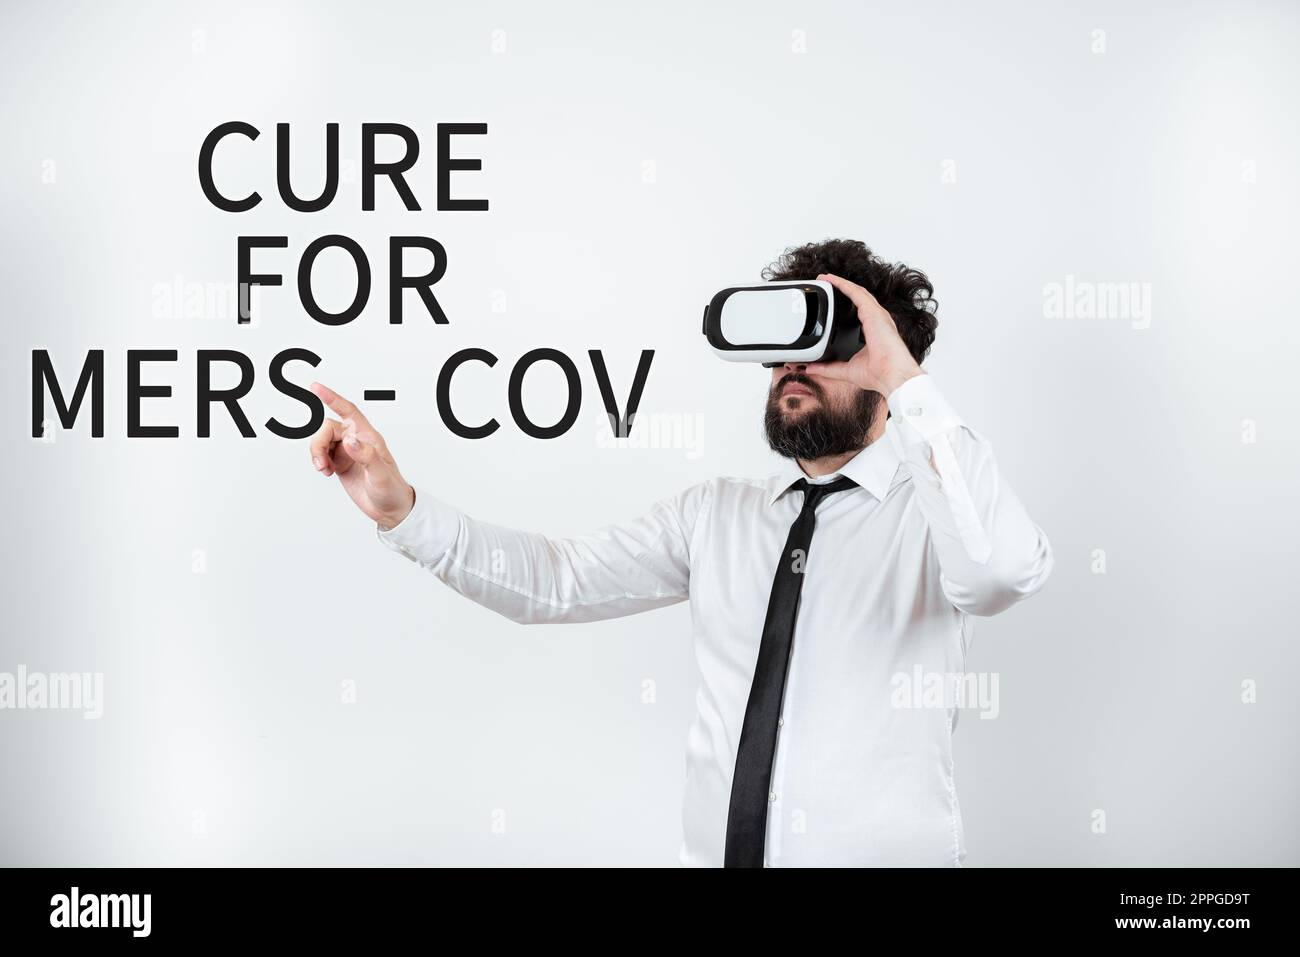 Text showing inspiration Cure For Mers Cov. Business approach individuals receive medical attention to relieve illness Stock Photo